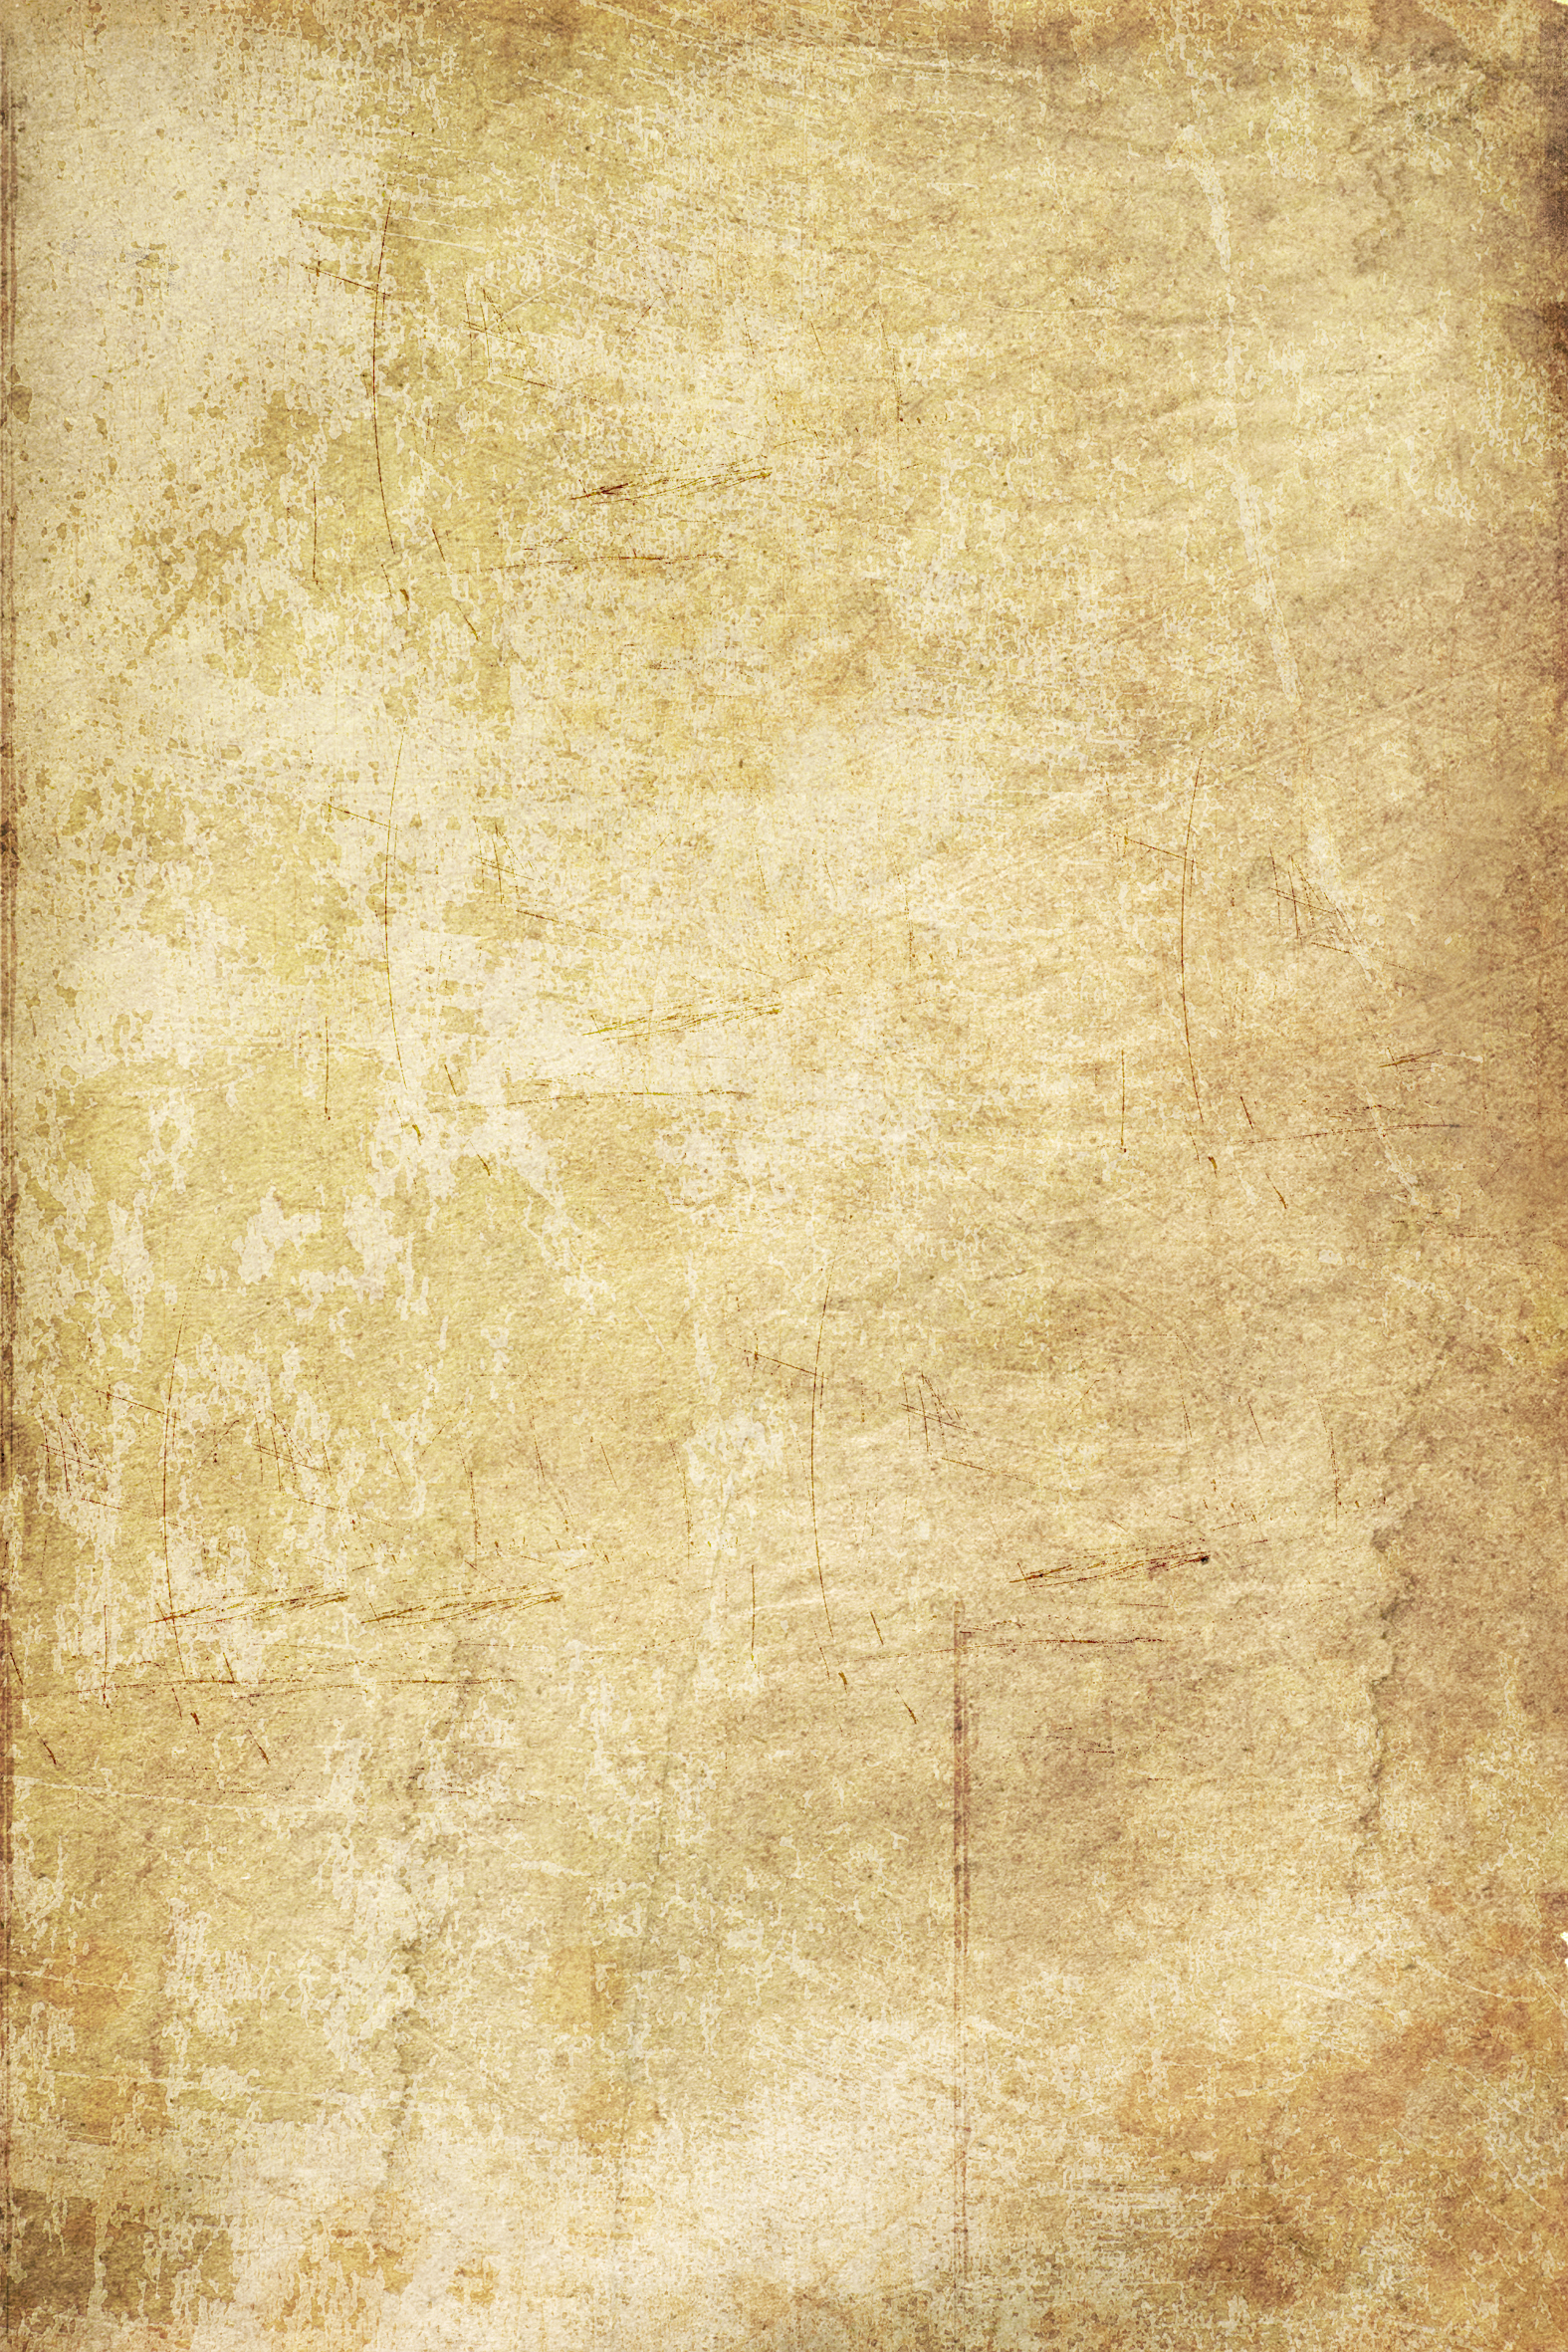 old paper texture background, free image